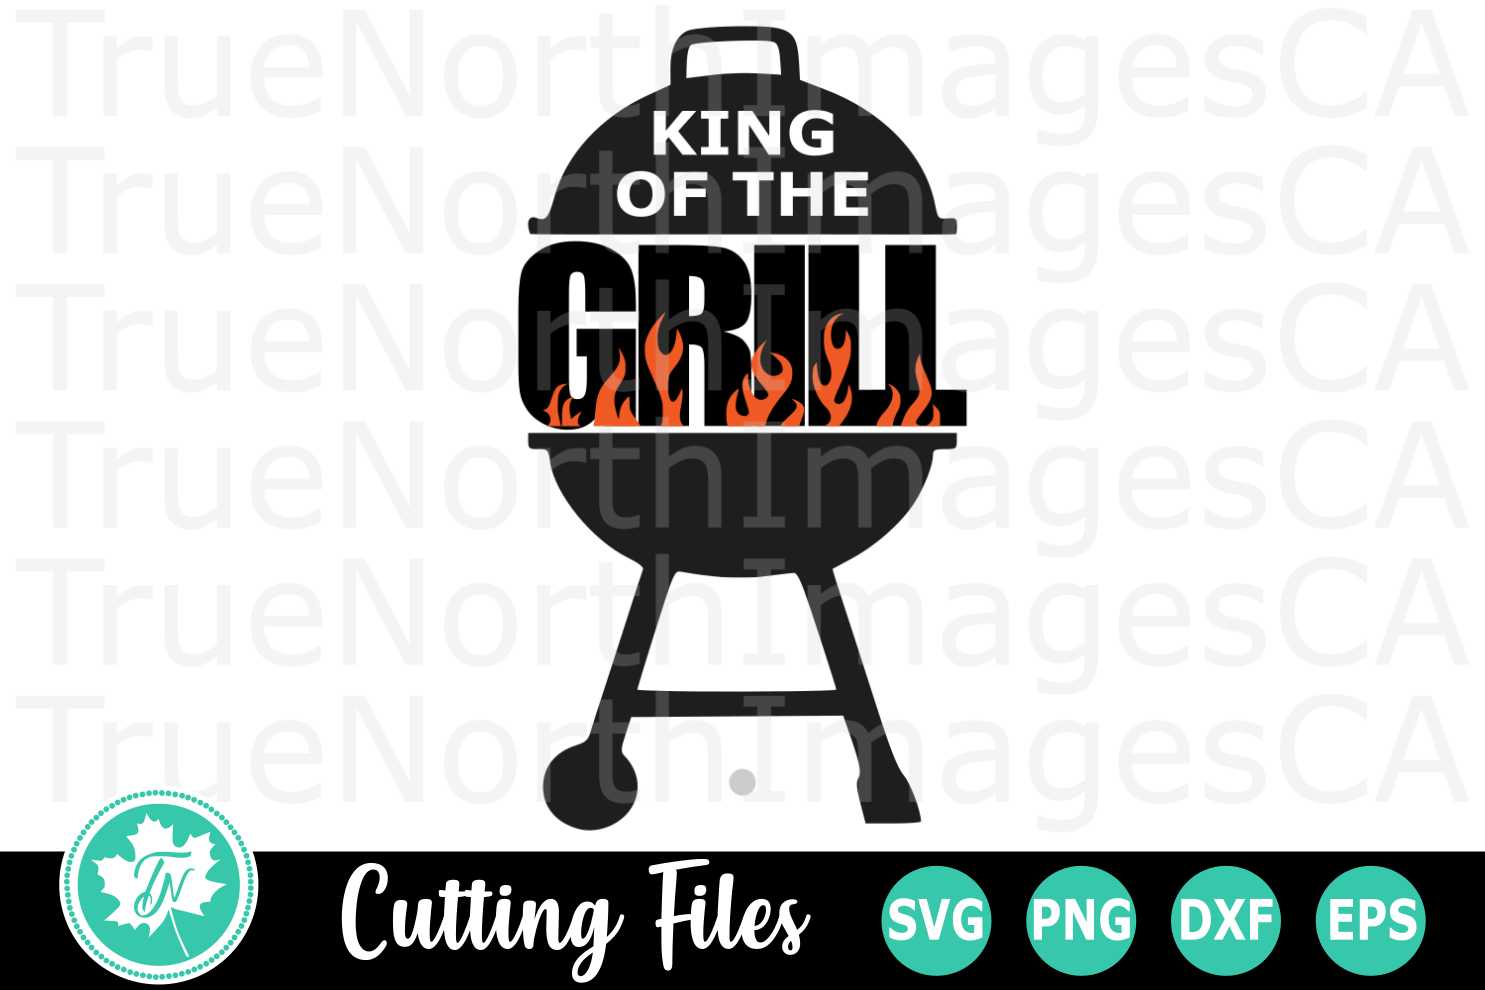 Download King of the Grill - A Fathers Day SVG Cut File (262086) | Cut Files | Design Bundles